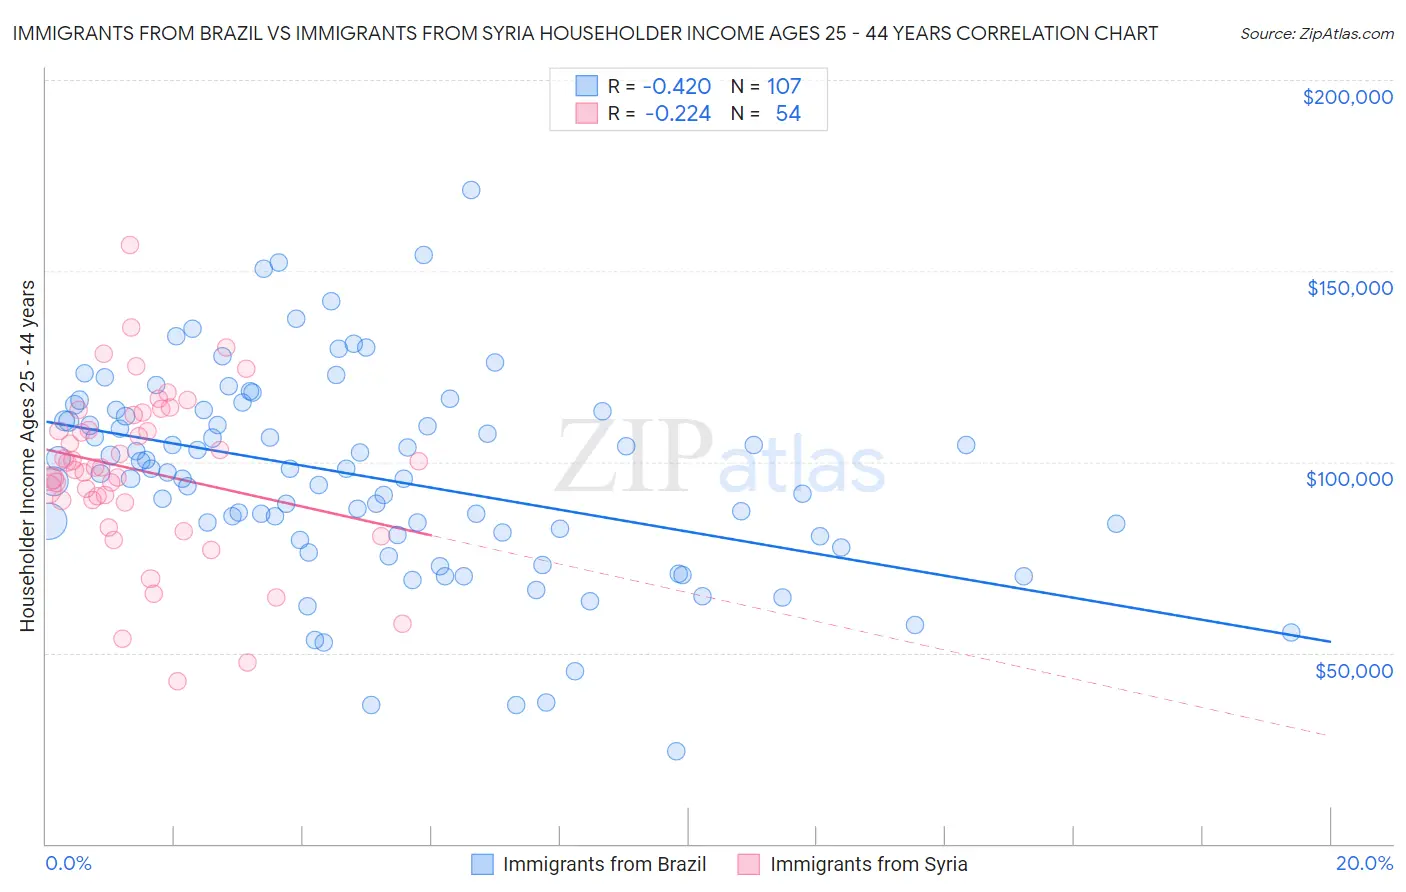 Immigrants from Brazil vs Immigrants from Syria Householder Income Ages 25 - 44 years